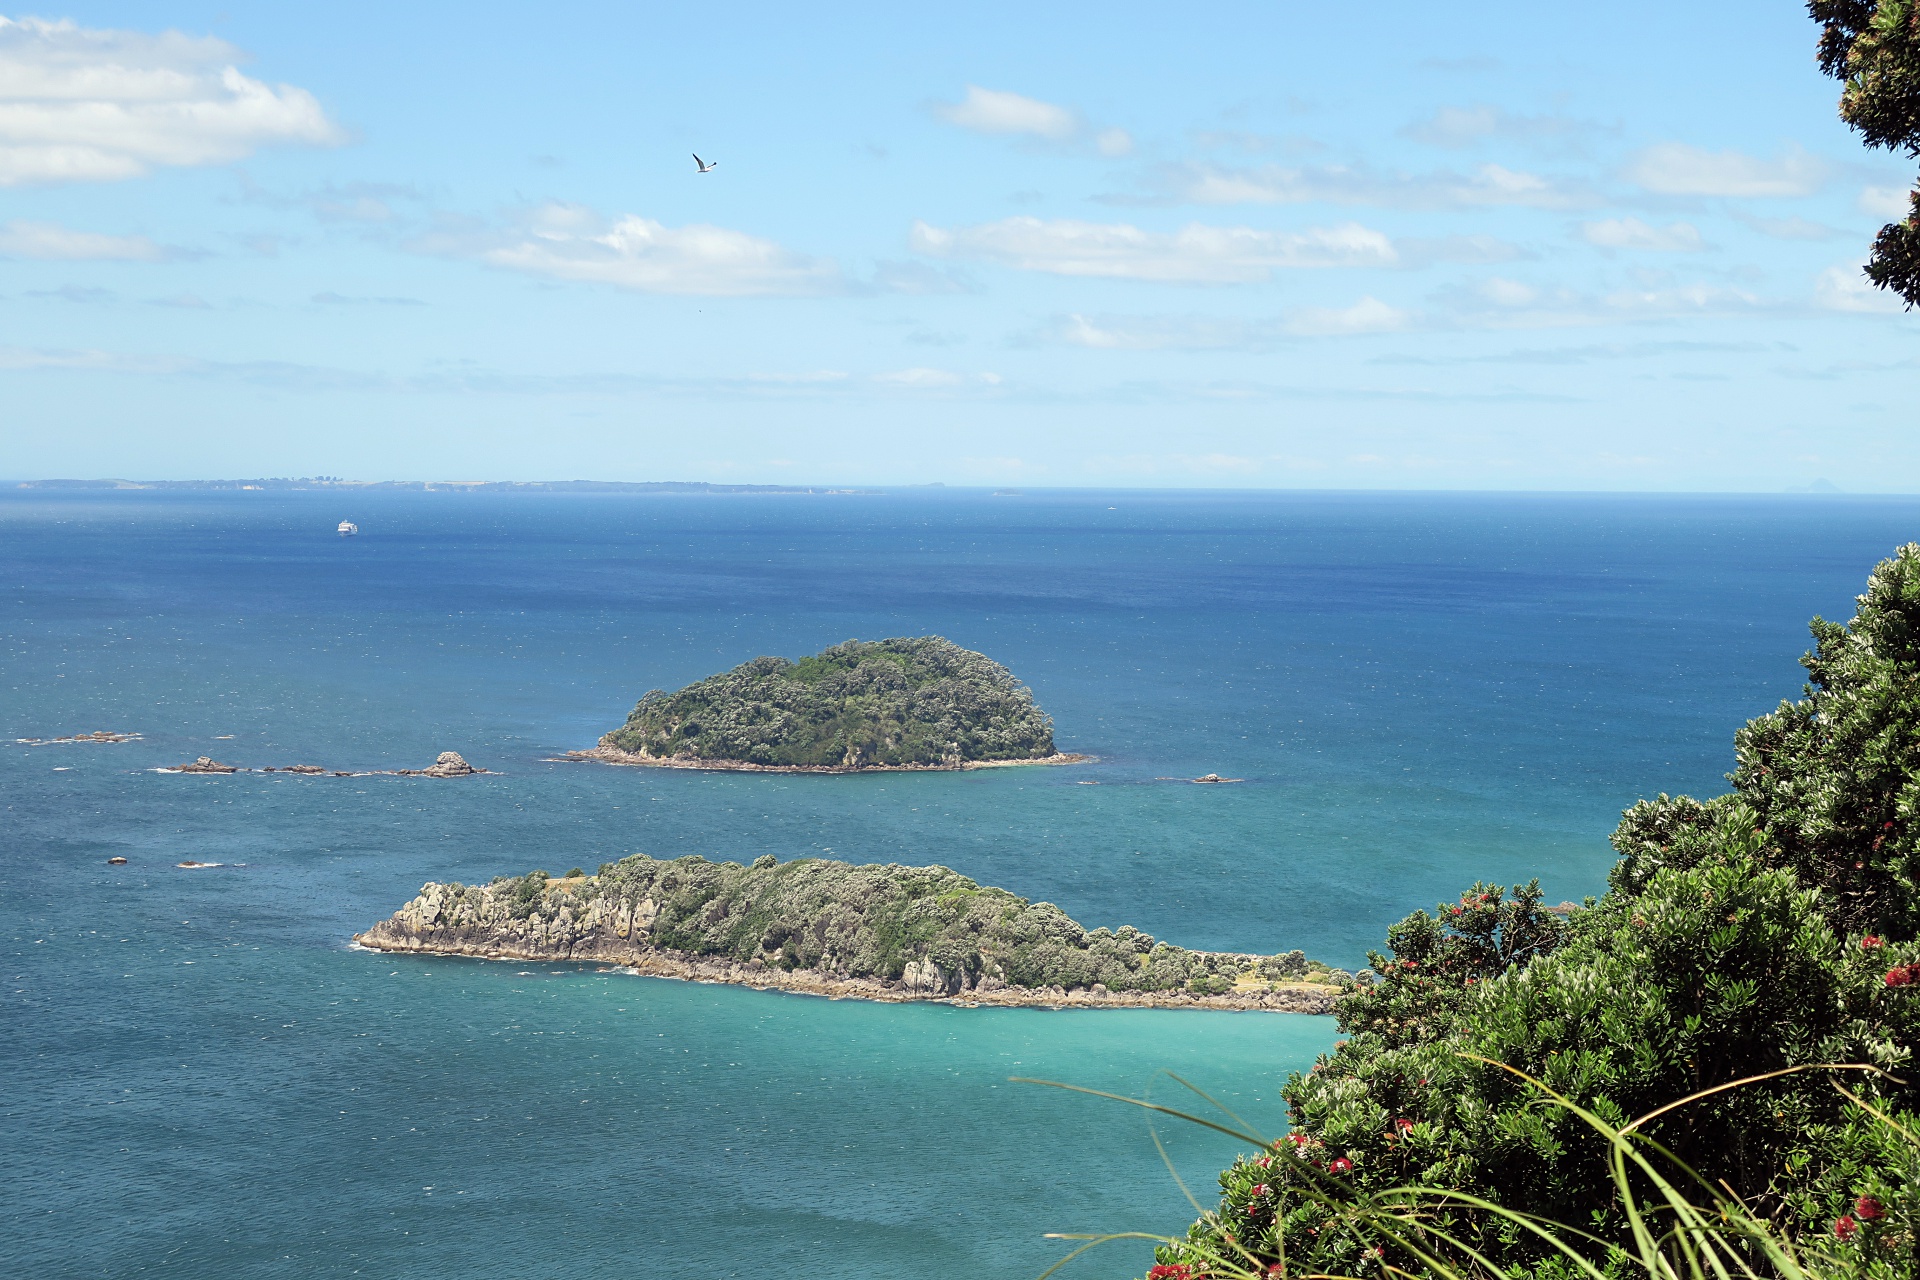 Second View from the top of Mount Maunganui